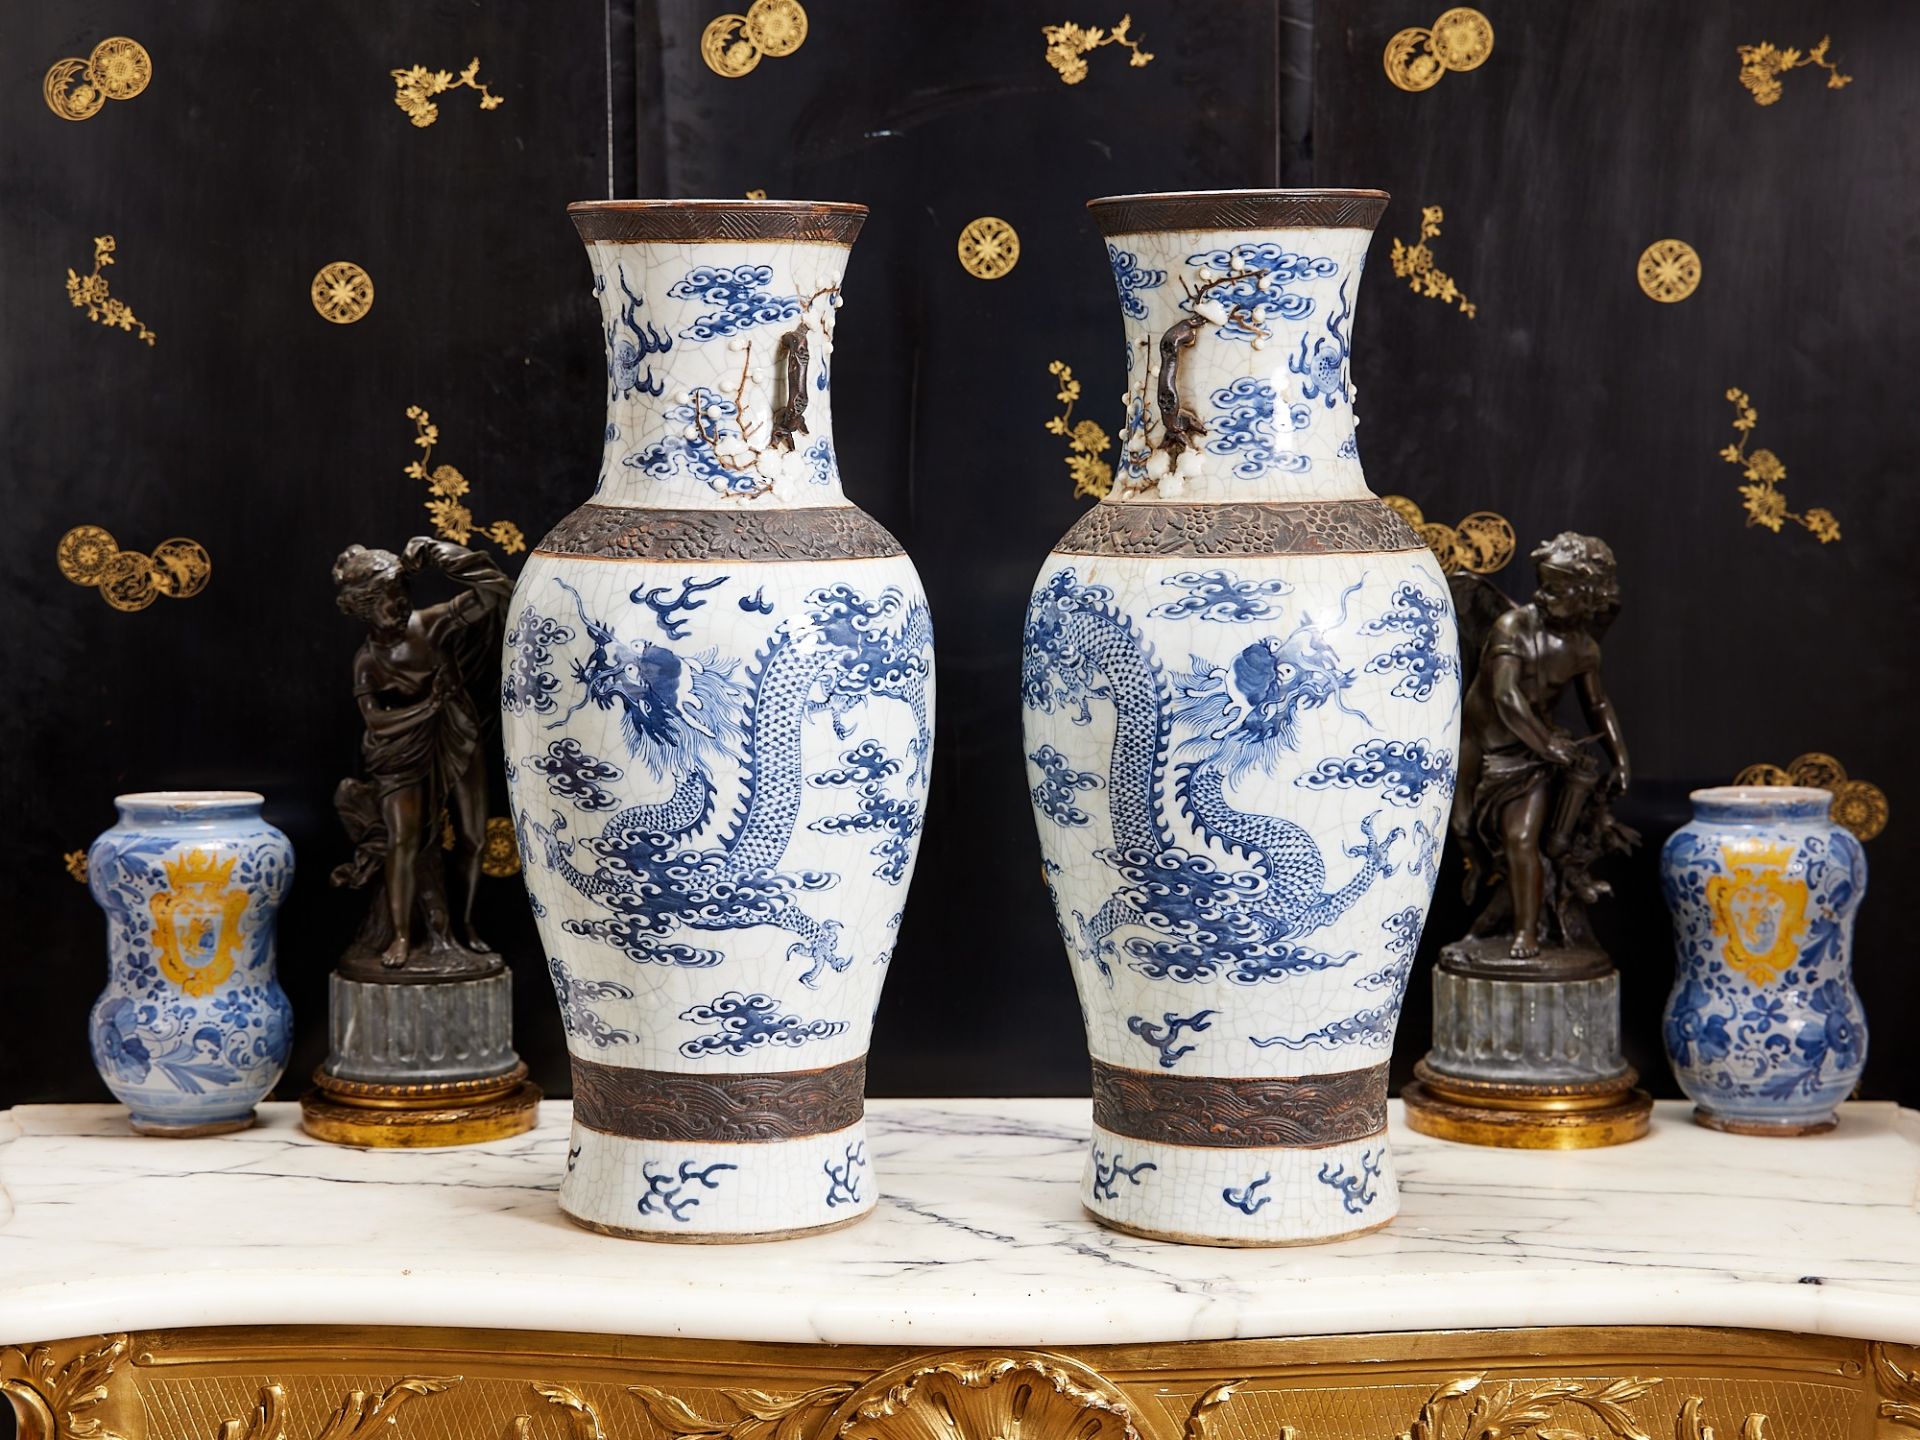 A LARGE PAIR OF 19TH CENTURY CHINESE CRACKLE WARE PORCELAIN VASES